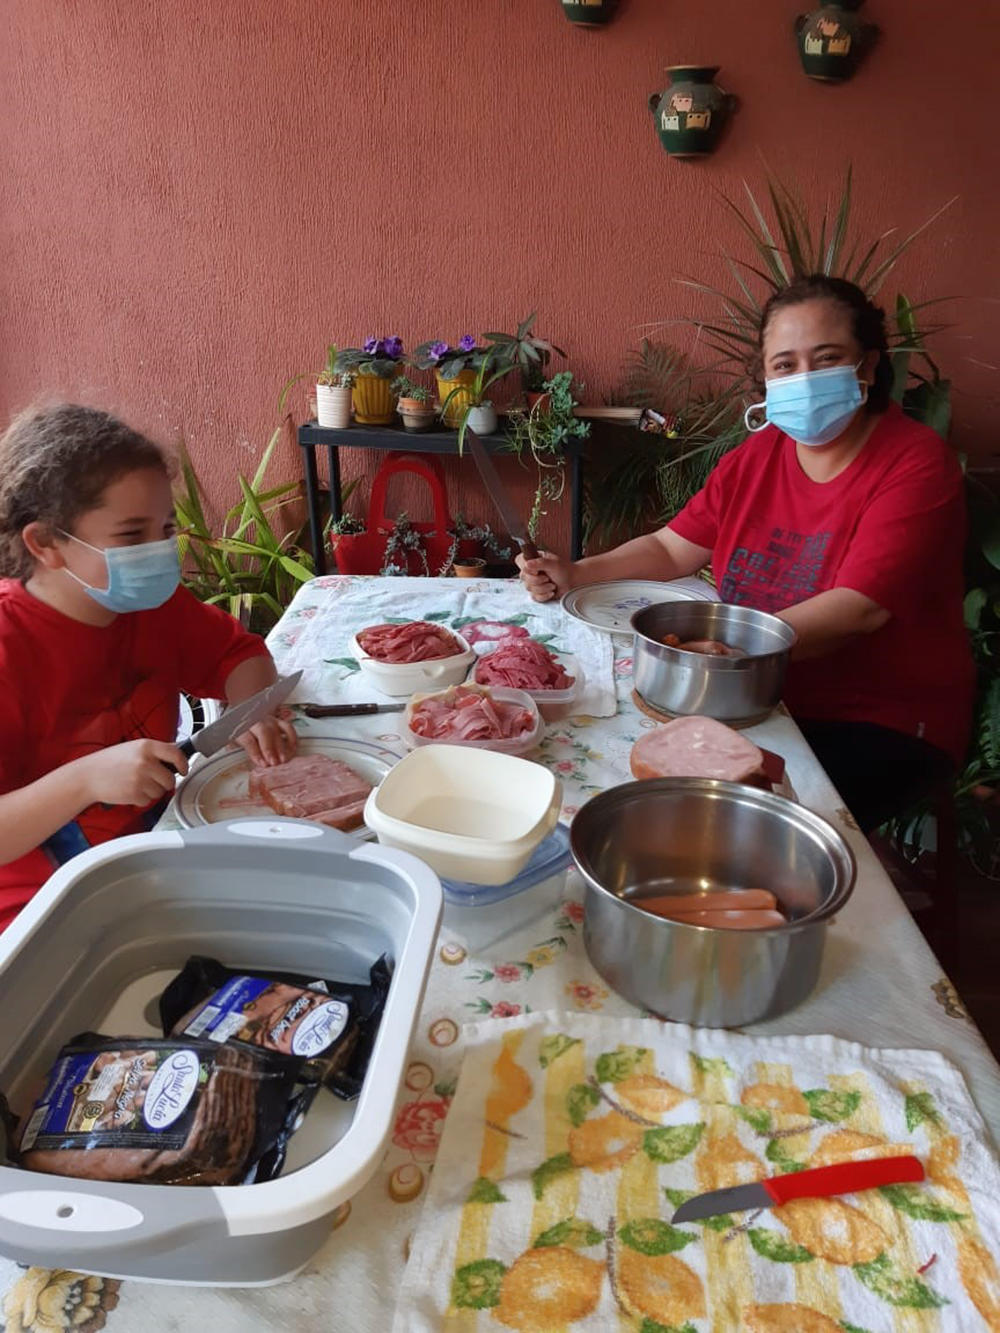 Pandemic food prep: Ana Michelle Dubon Estrada made fiambre, a traditional Guatemalan salad-like dish served on the Day of the Dead, with her daughter in her grandmother's garage — while grandmother called out instructions from a nearby doorway.